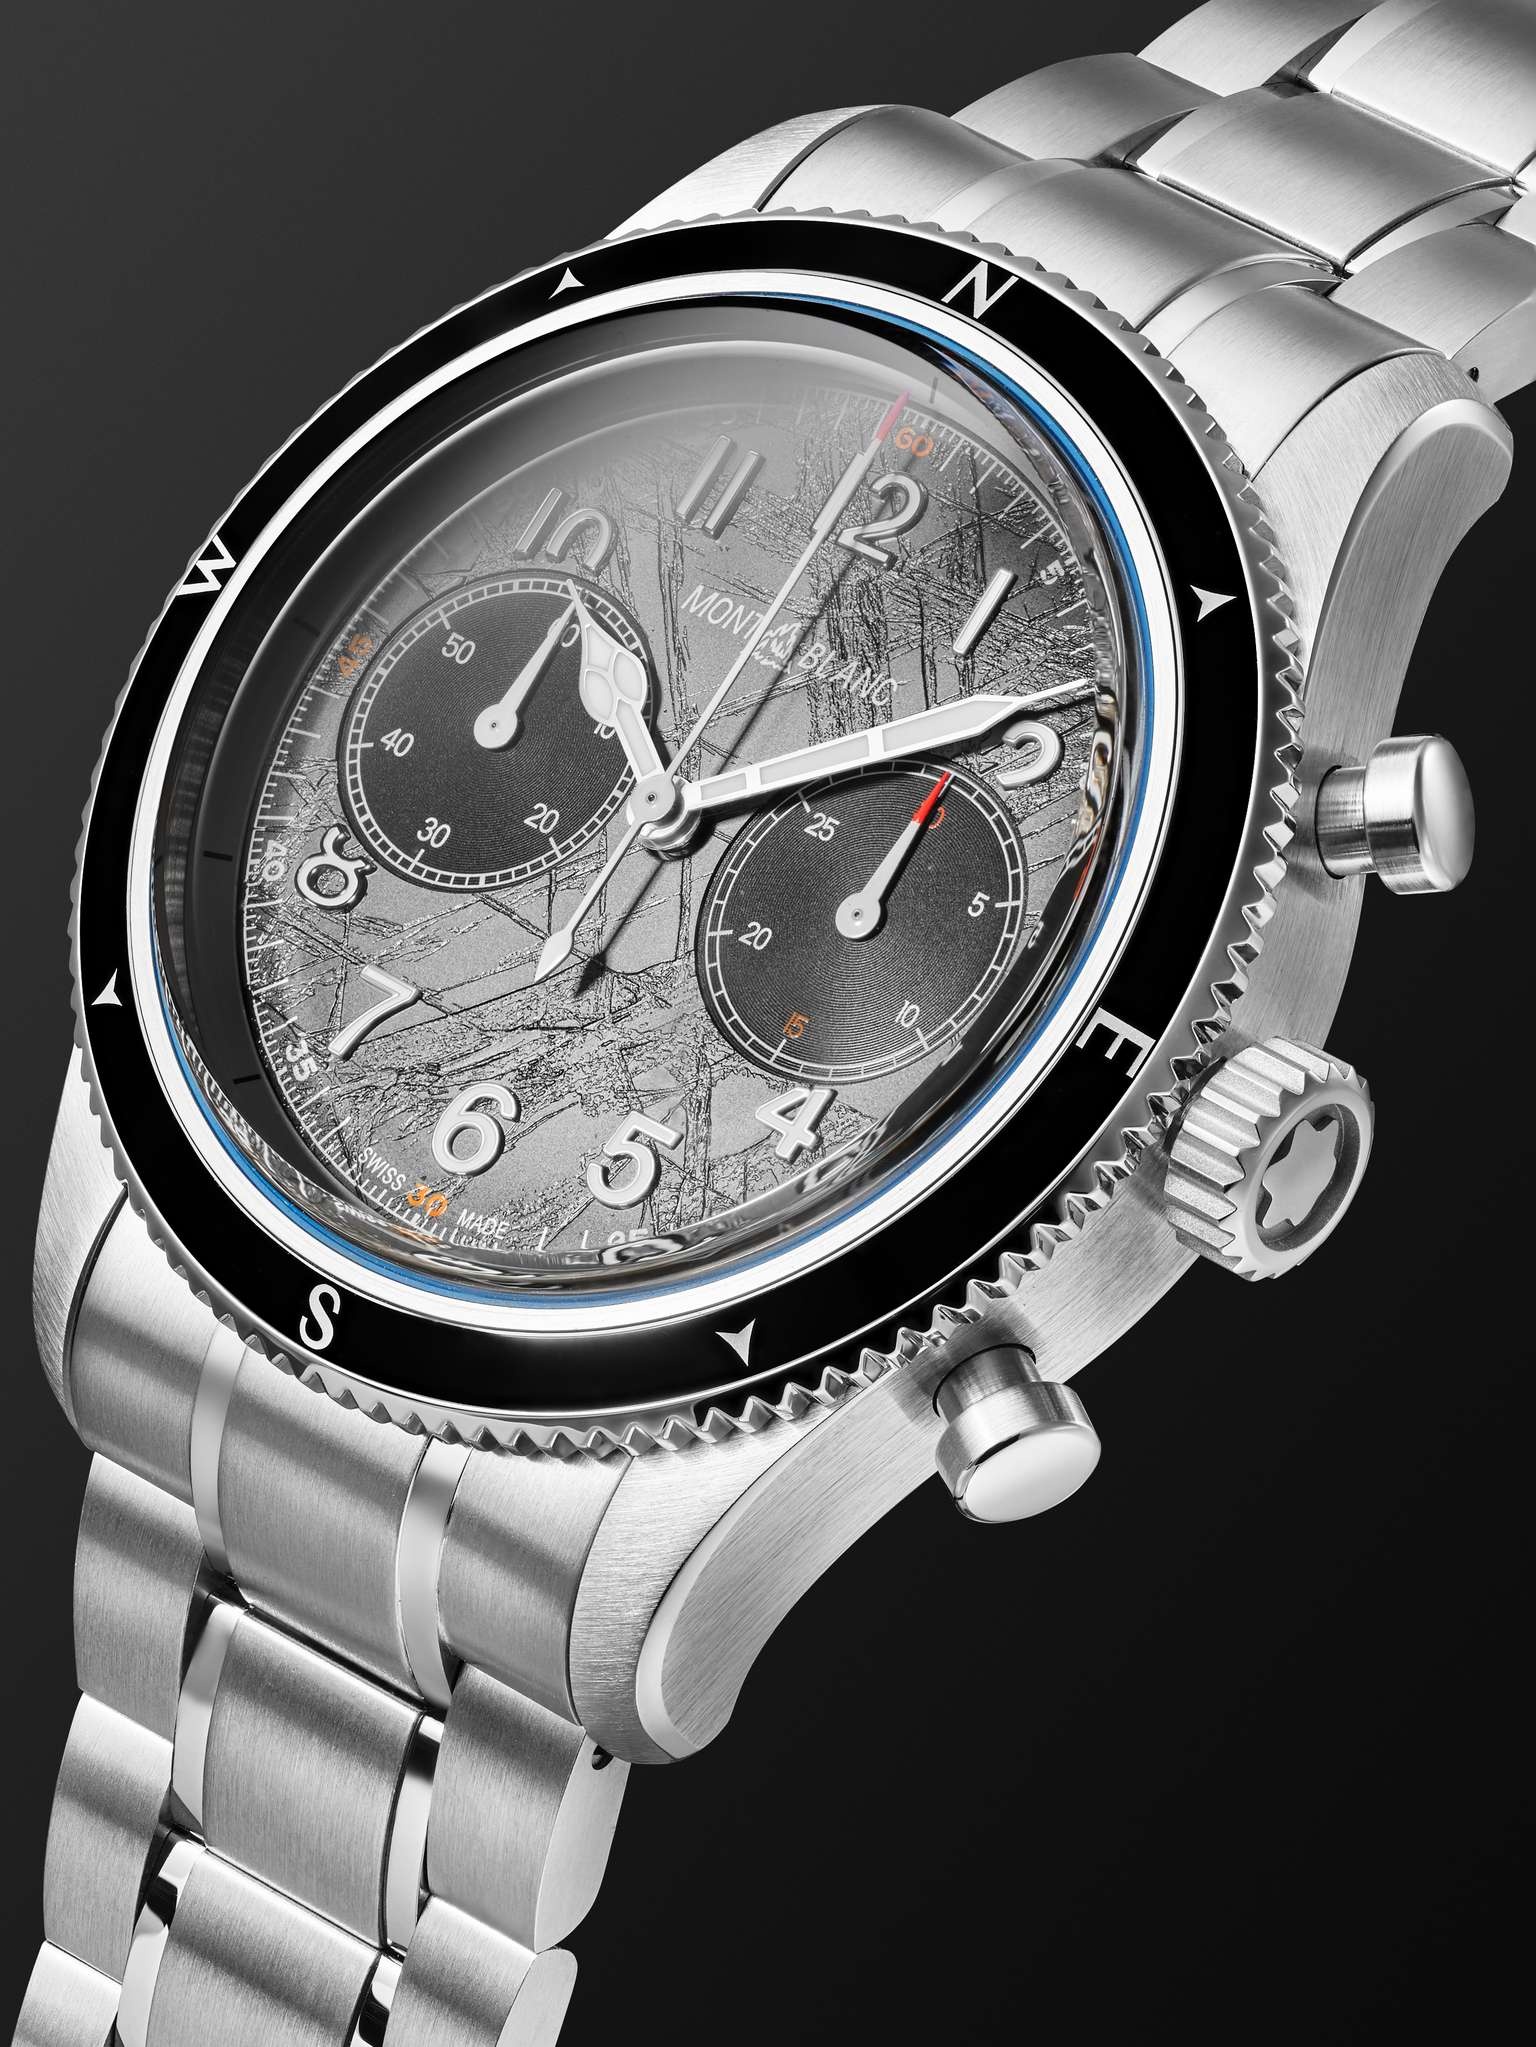 1858 0 Oxygen The 8000 Automatic Chronograph 42mm Stainless Steel Watch, Ref. No. 130983 - 3